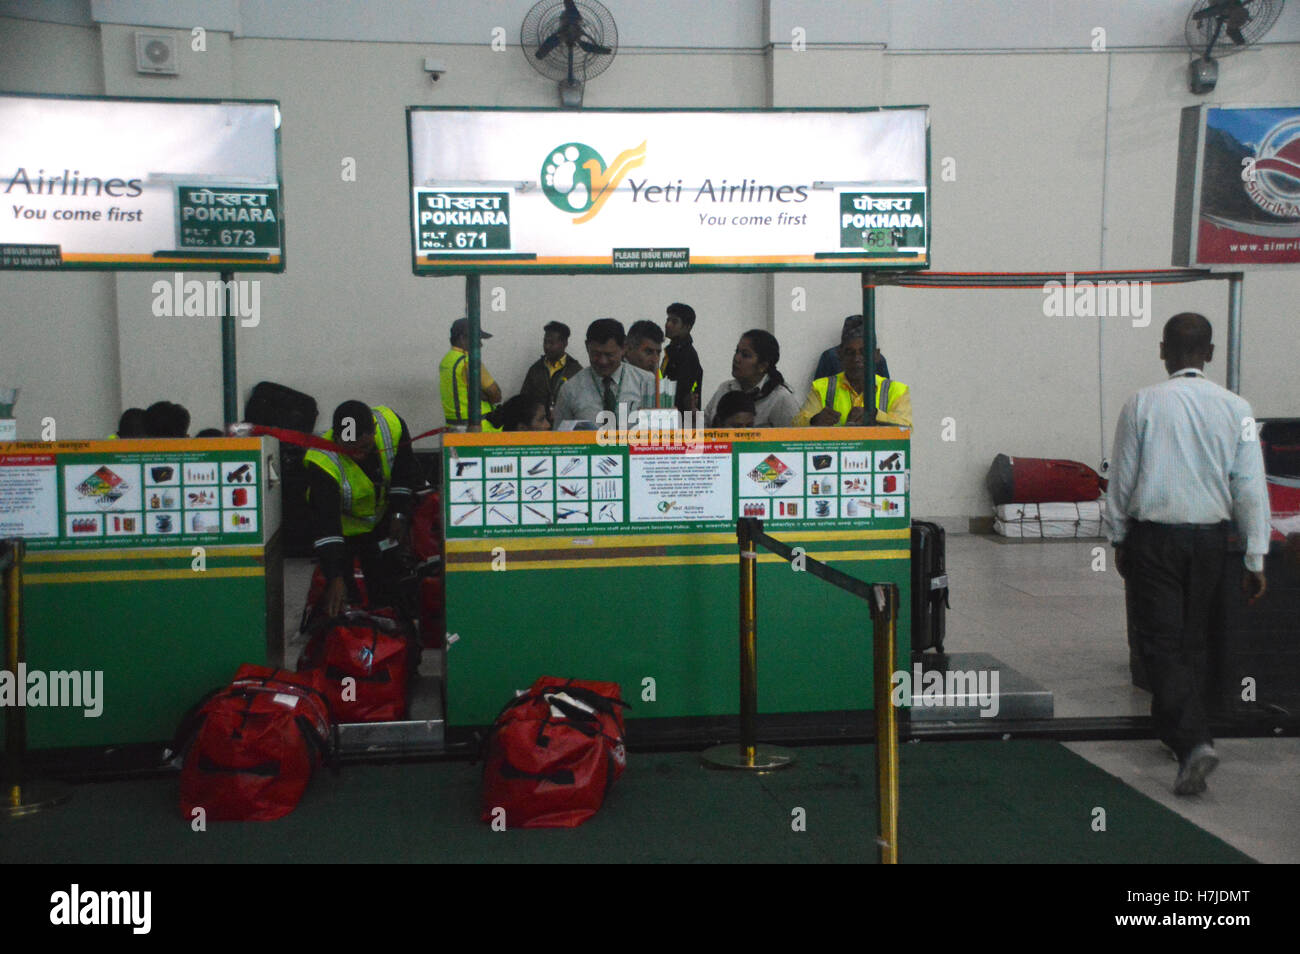 Checking in Desk for Yeti Airlines at the Domestic Terminal at Kathmandu Tribhuvan Airport, Nepal, Asia. Stock Photo